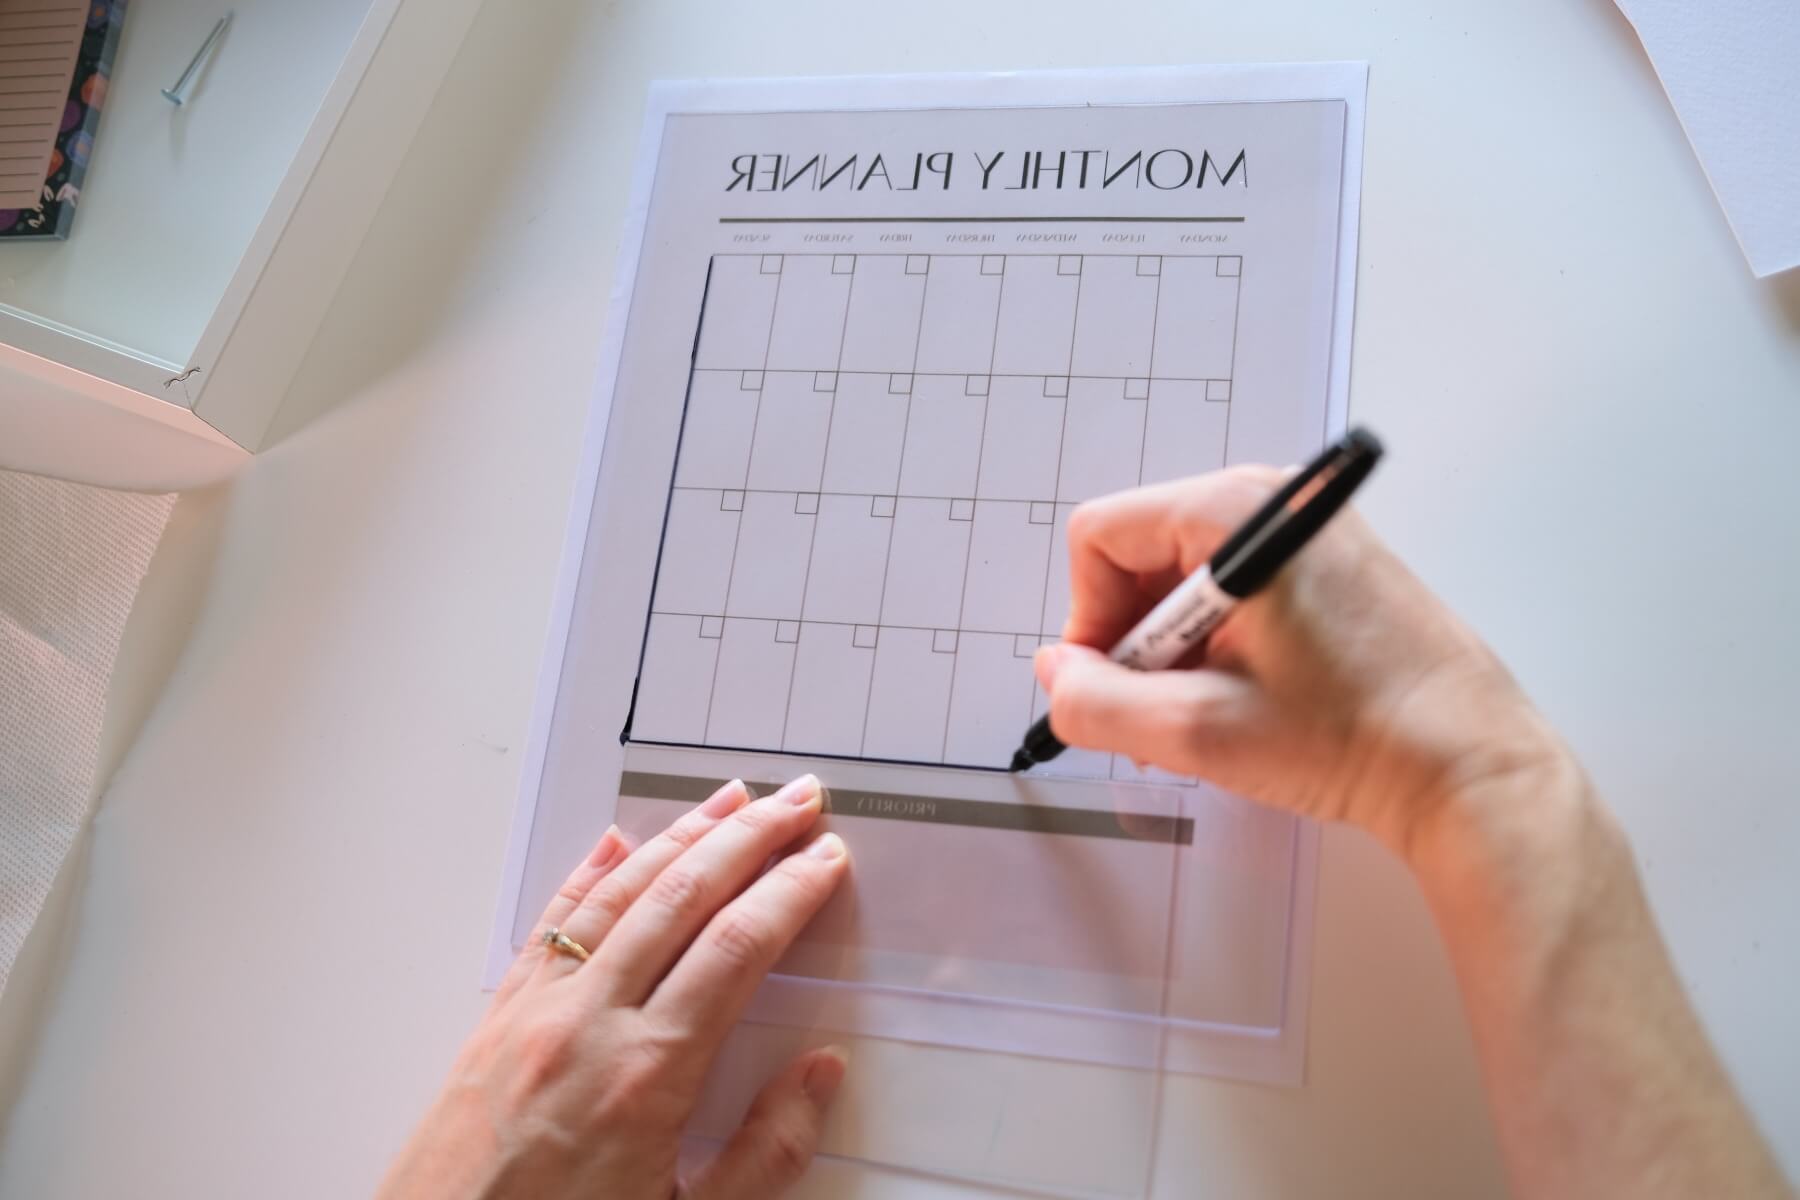 draw the calendar in a permanent marker